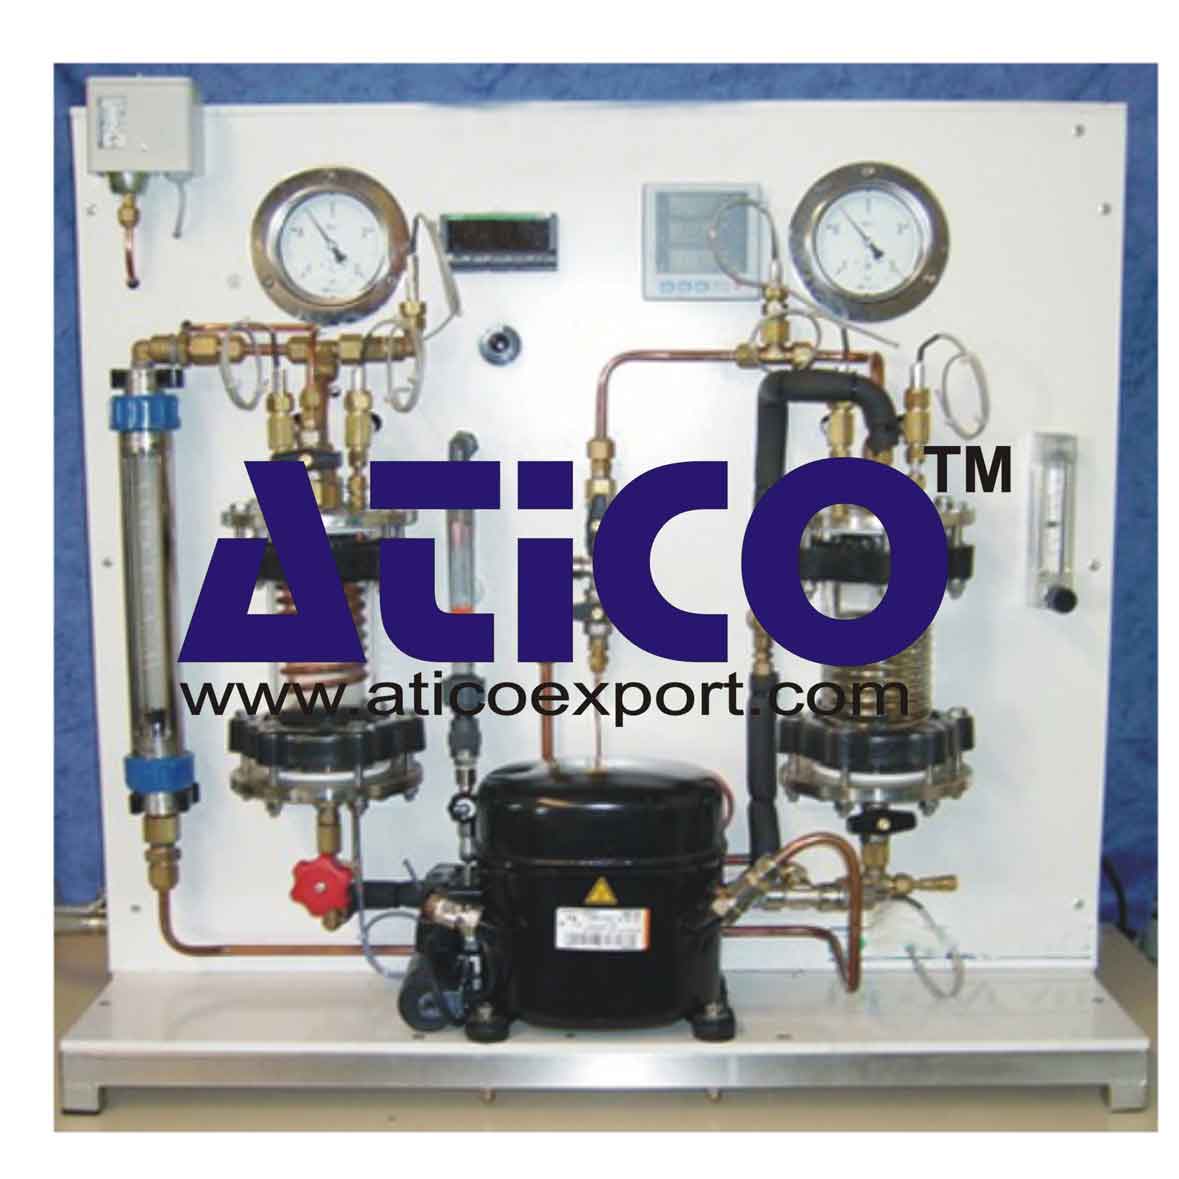 Refrigeration Cycle Demonstration Equipment